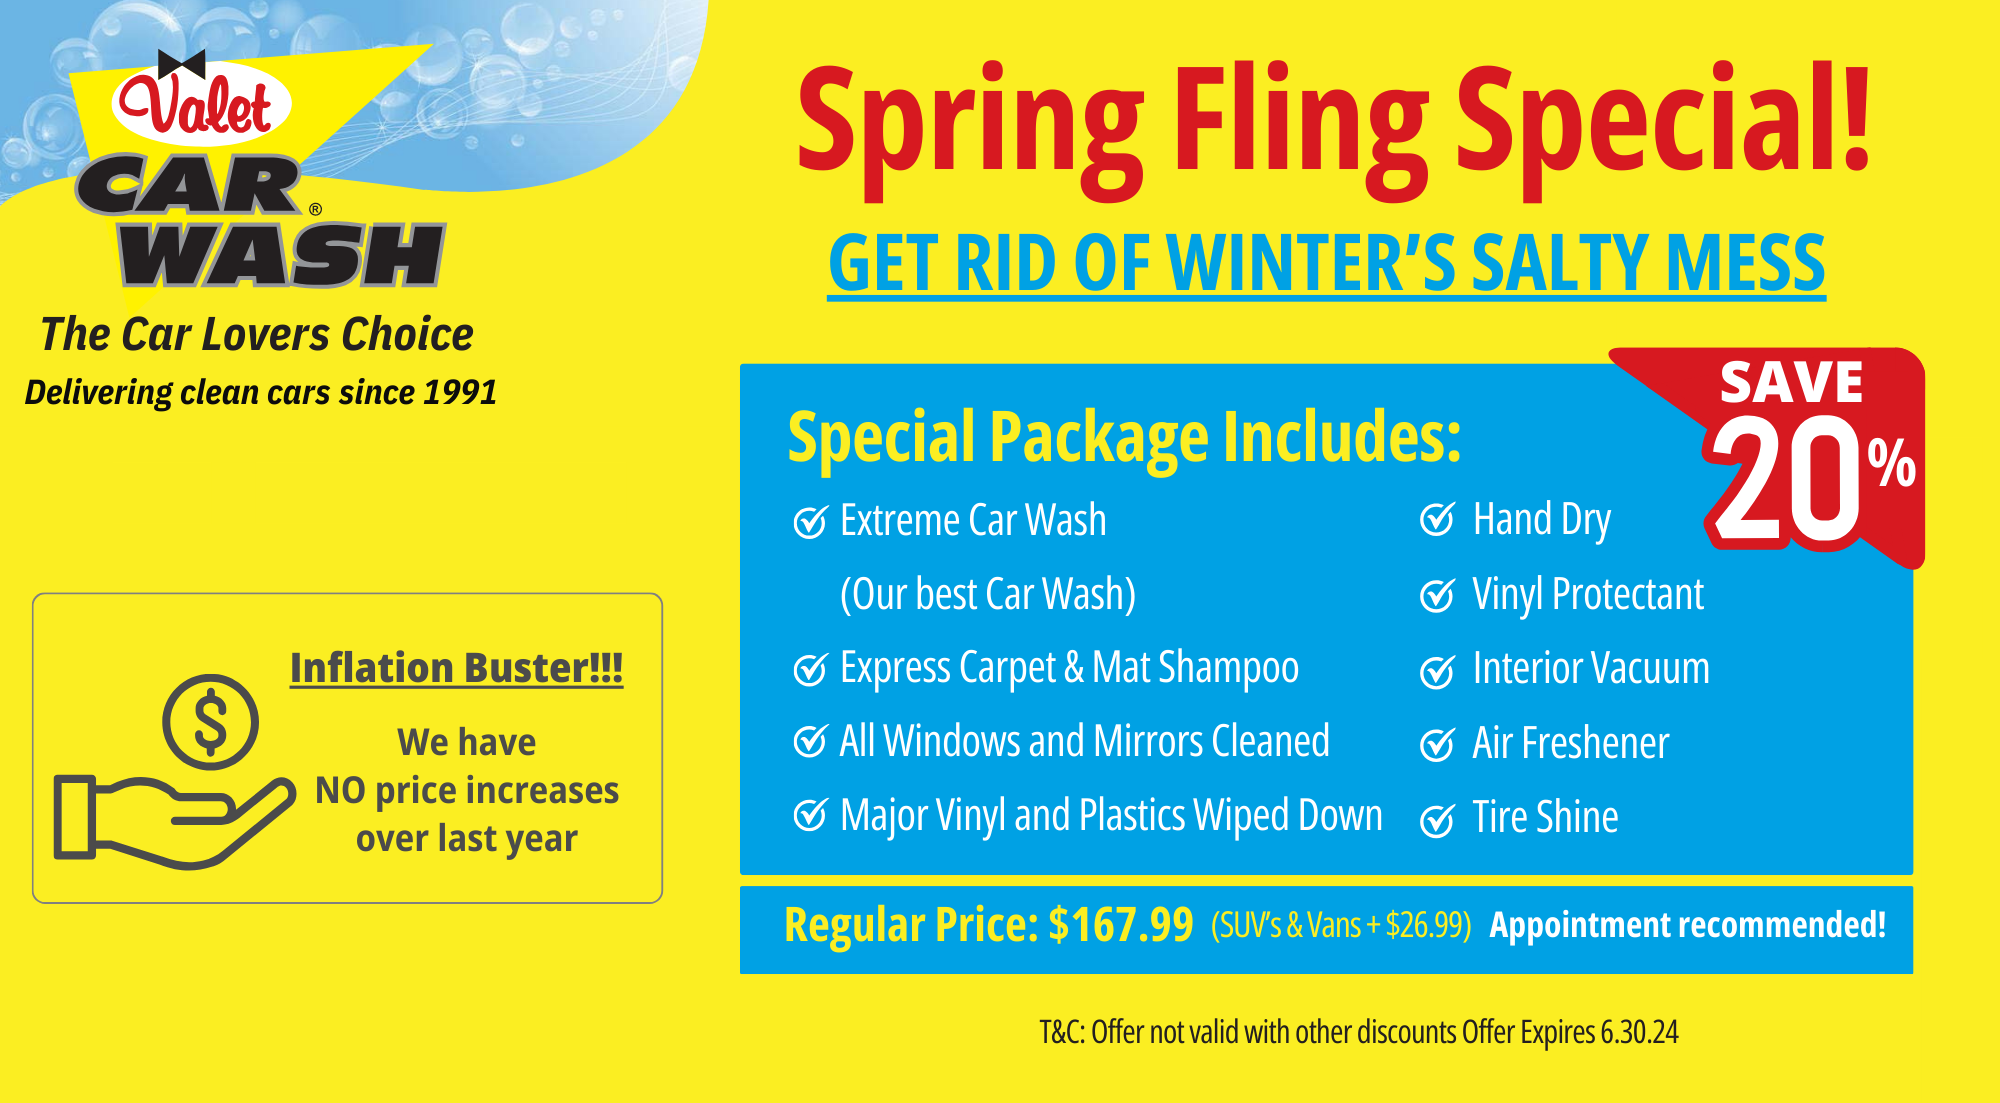 Spring Fling Special - Save 20% on extreme car wash, express carpet & mat shampoo, all windows and mirrors cleaned, major vinyl & plastics wiped down, hand dry, vinyl protectant, interior vacuun, air freshener, tire shine. Appointment recommended. Expires 6.30.24